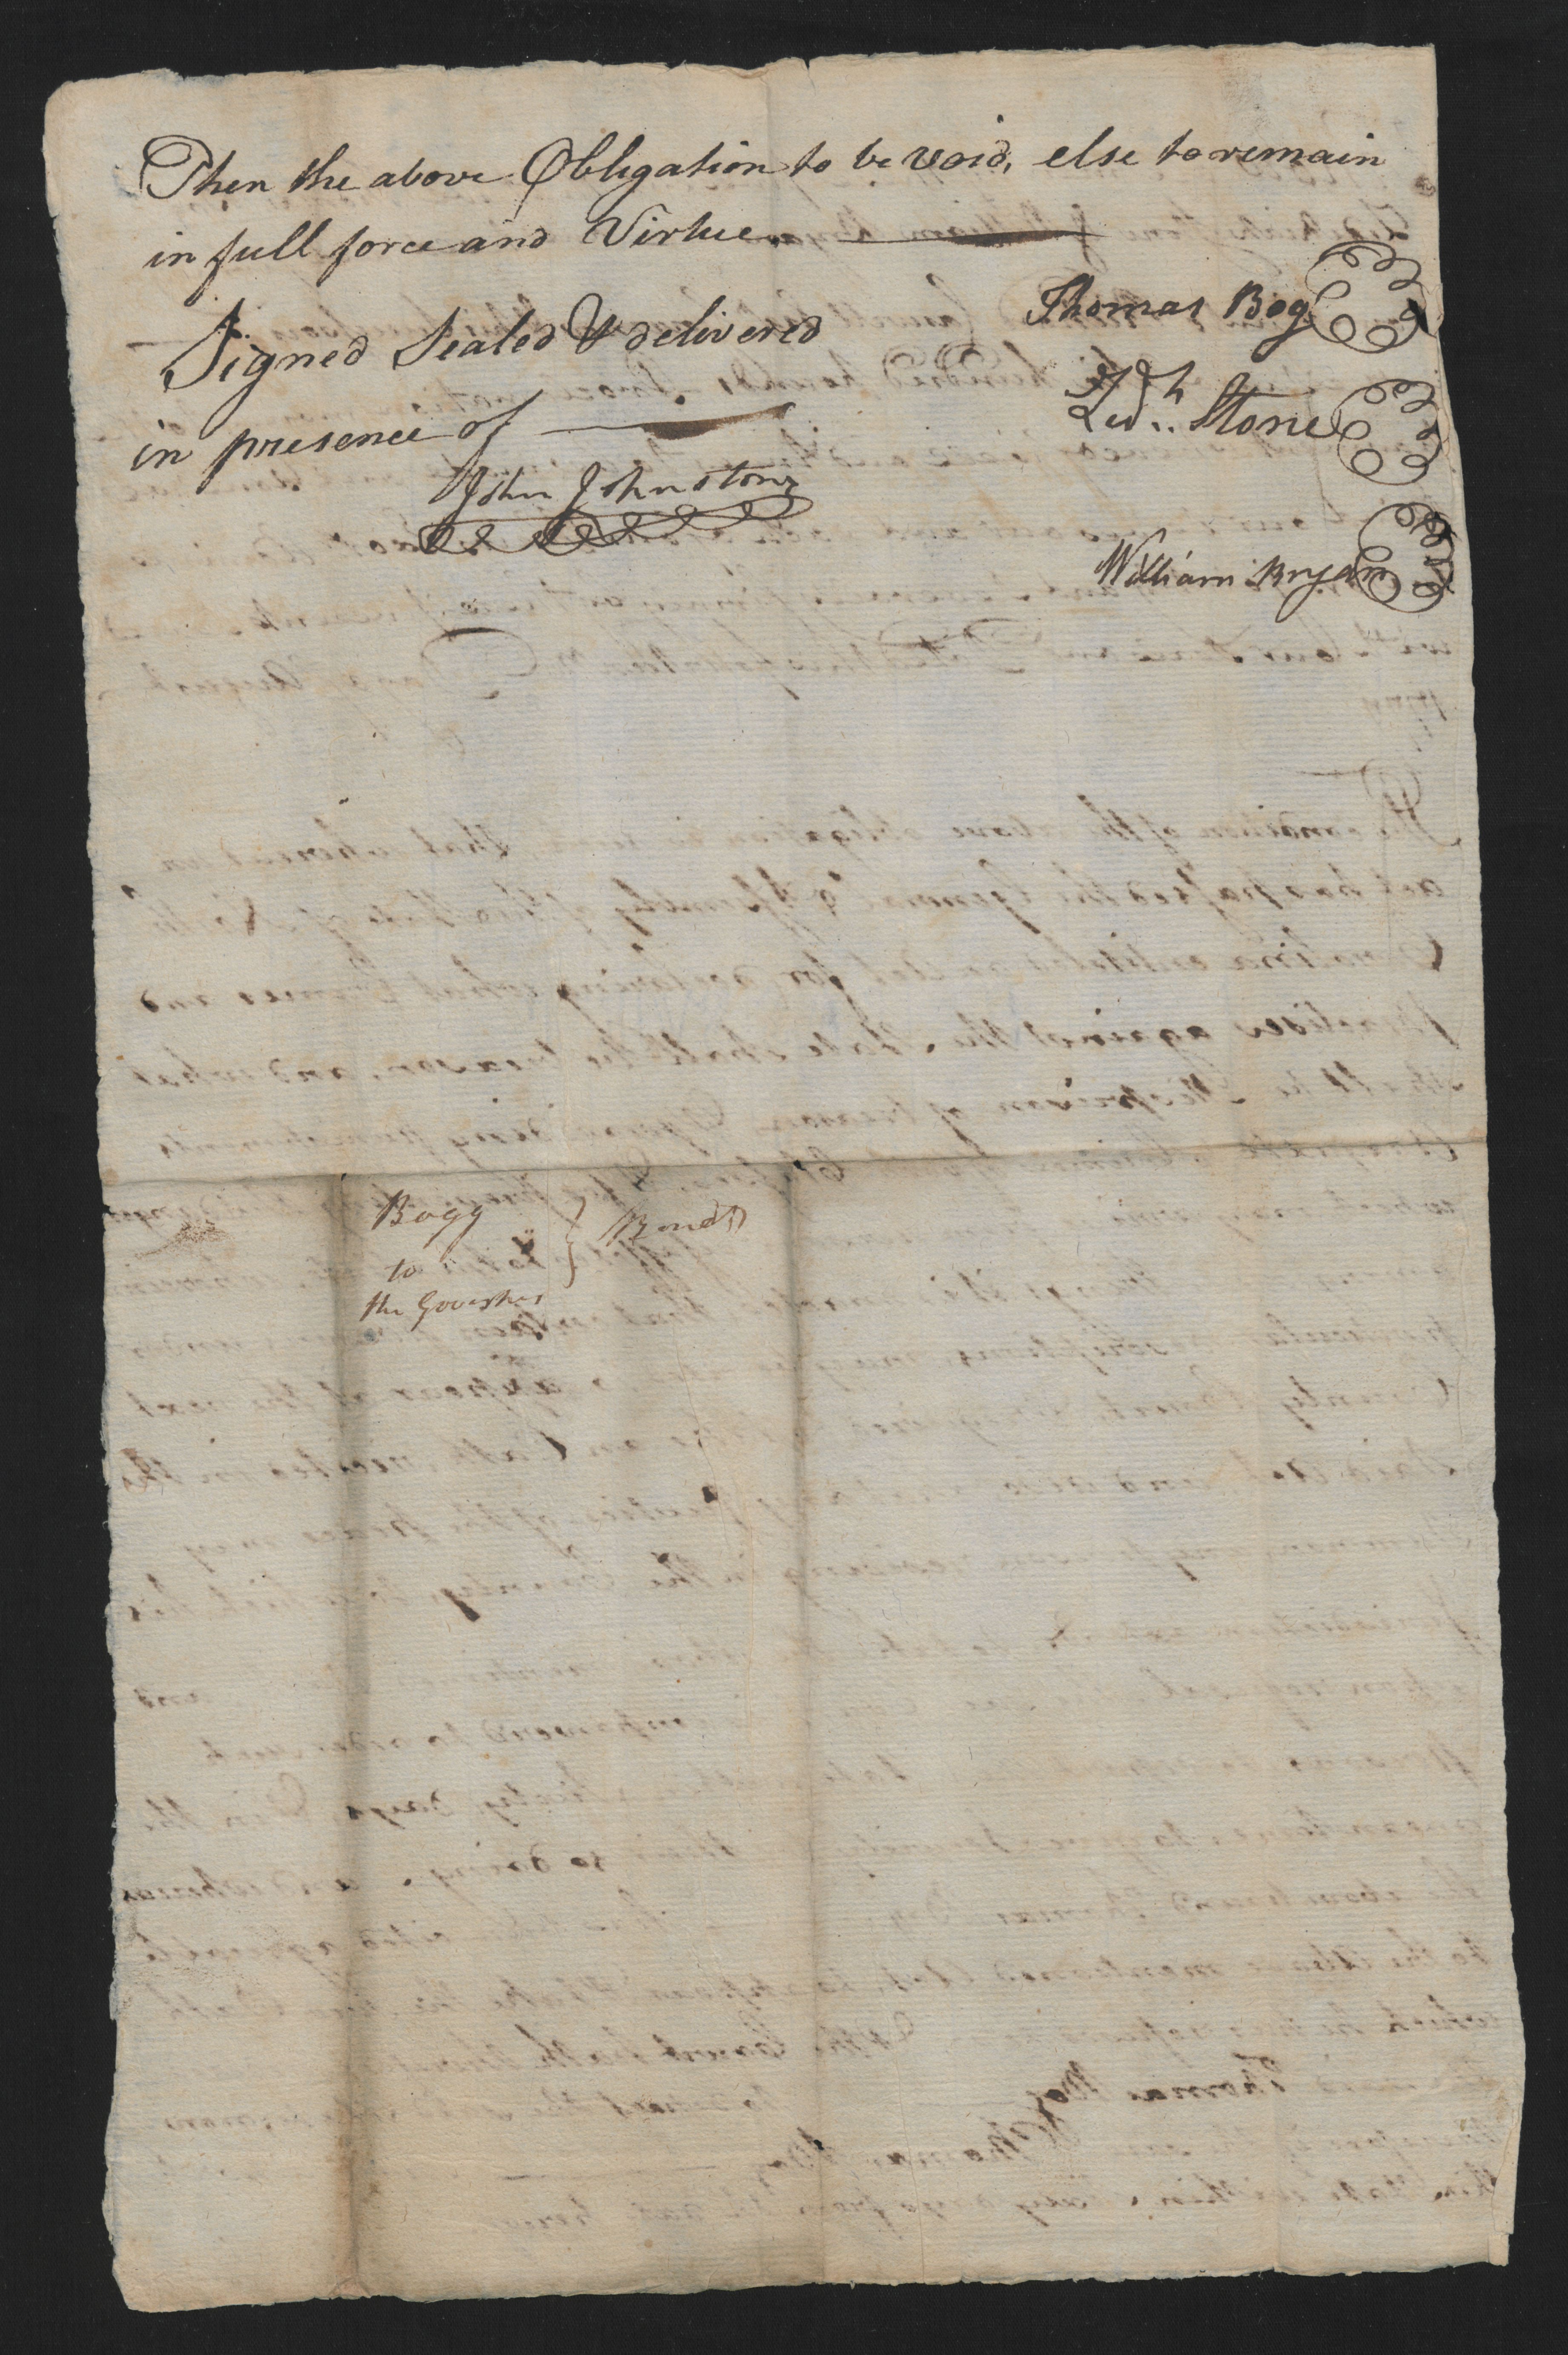 Bond from the Bertie County Court for Thomas Bog to leave North Carolina, 14 August 1777, page 2